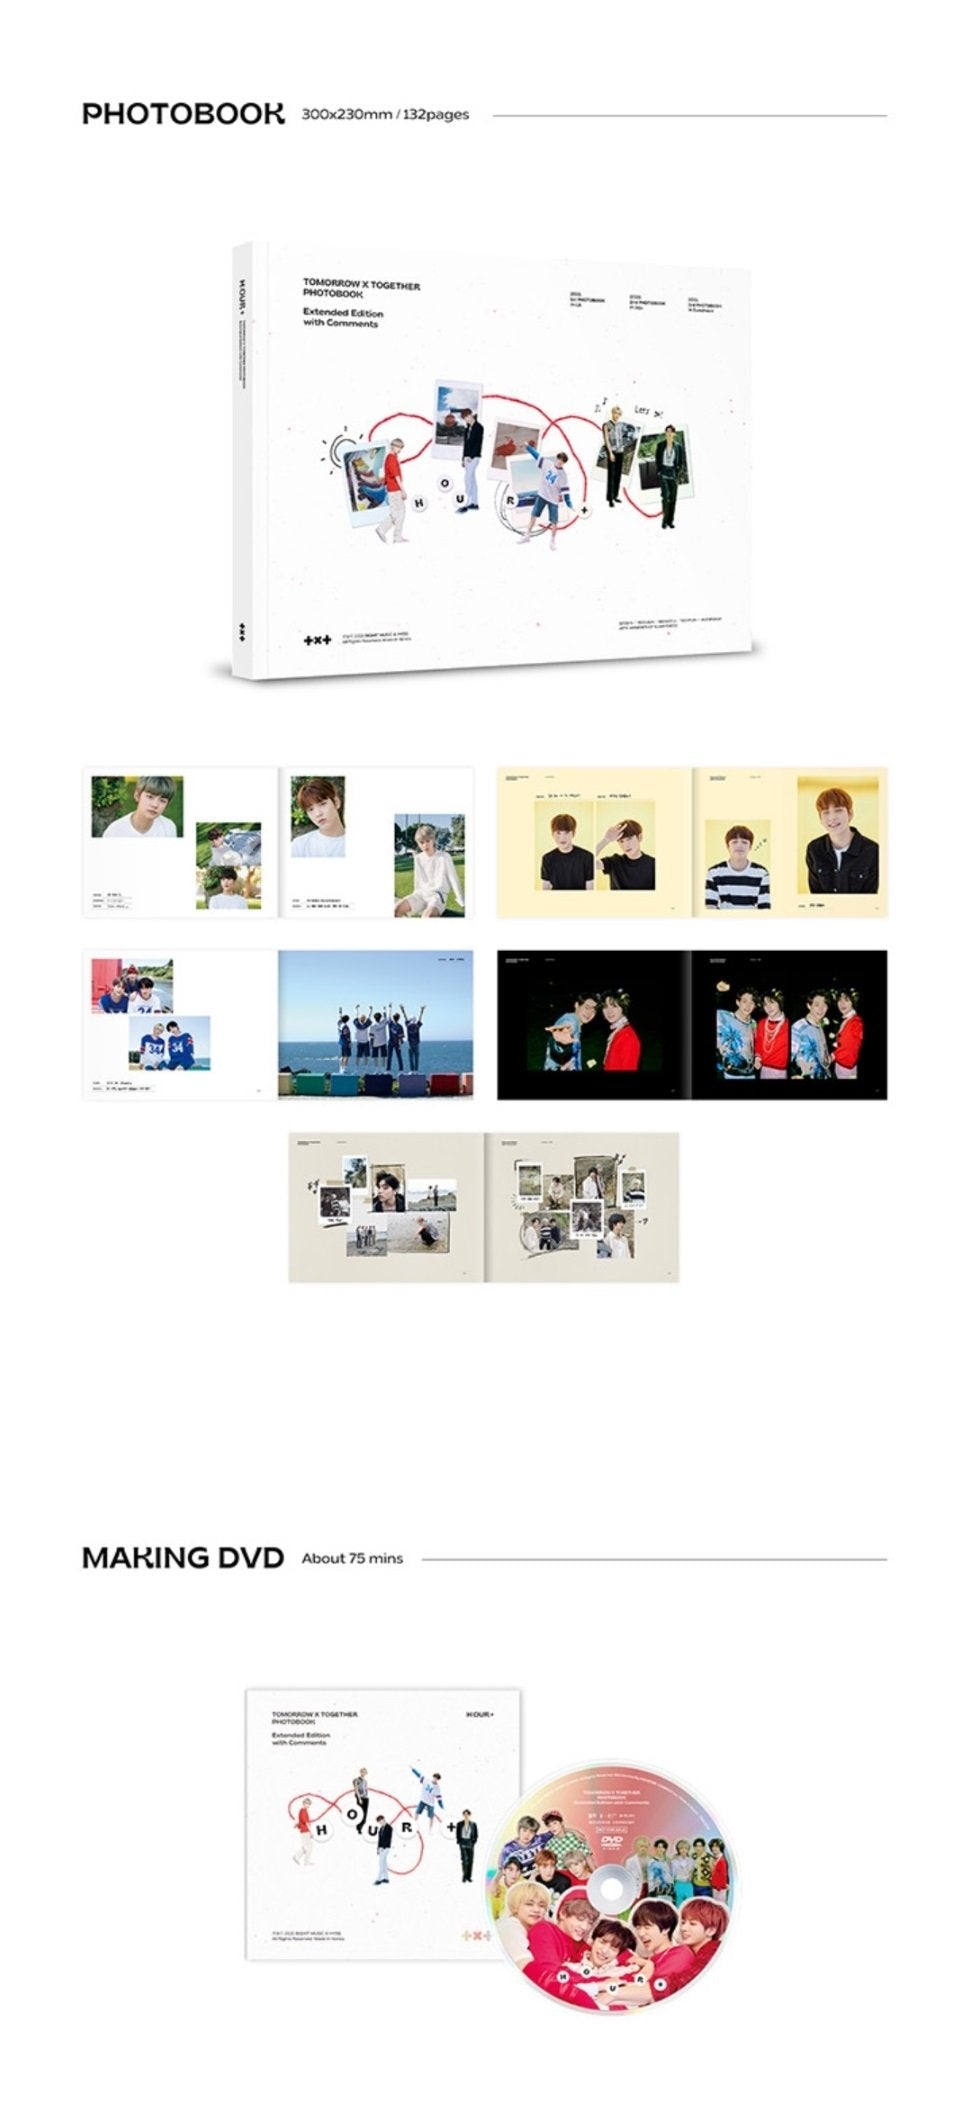 TXT - THE 3RD PHOTOBOOK H:OUR